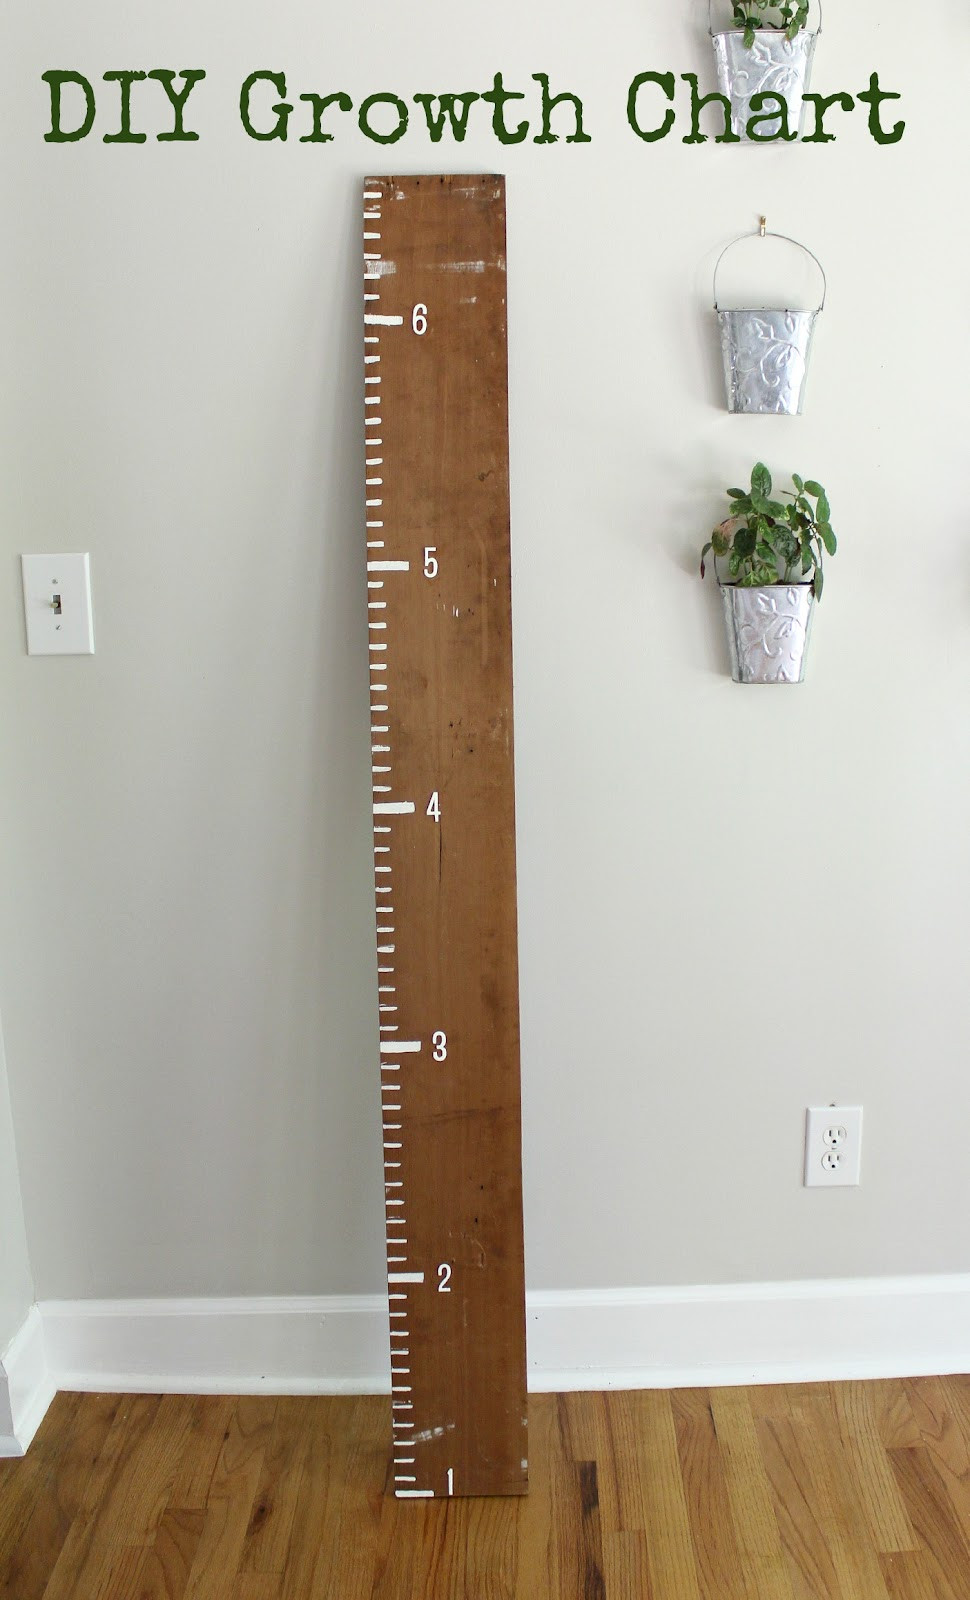 DIY Wood Growth Chart
 Diy Wood Growth Chart PDF Woodworking